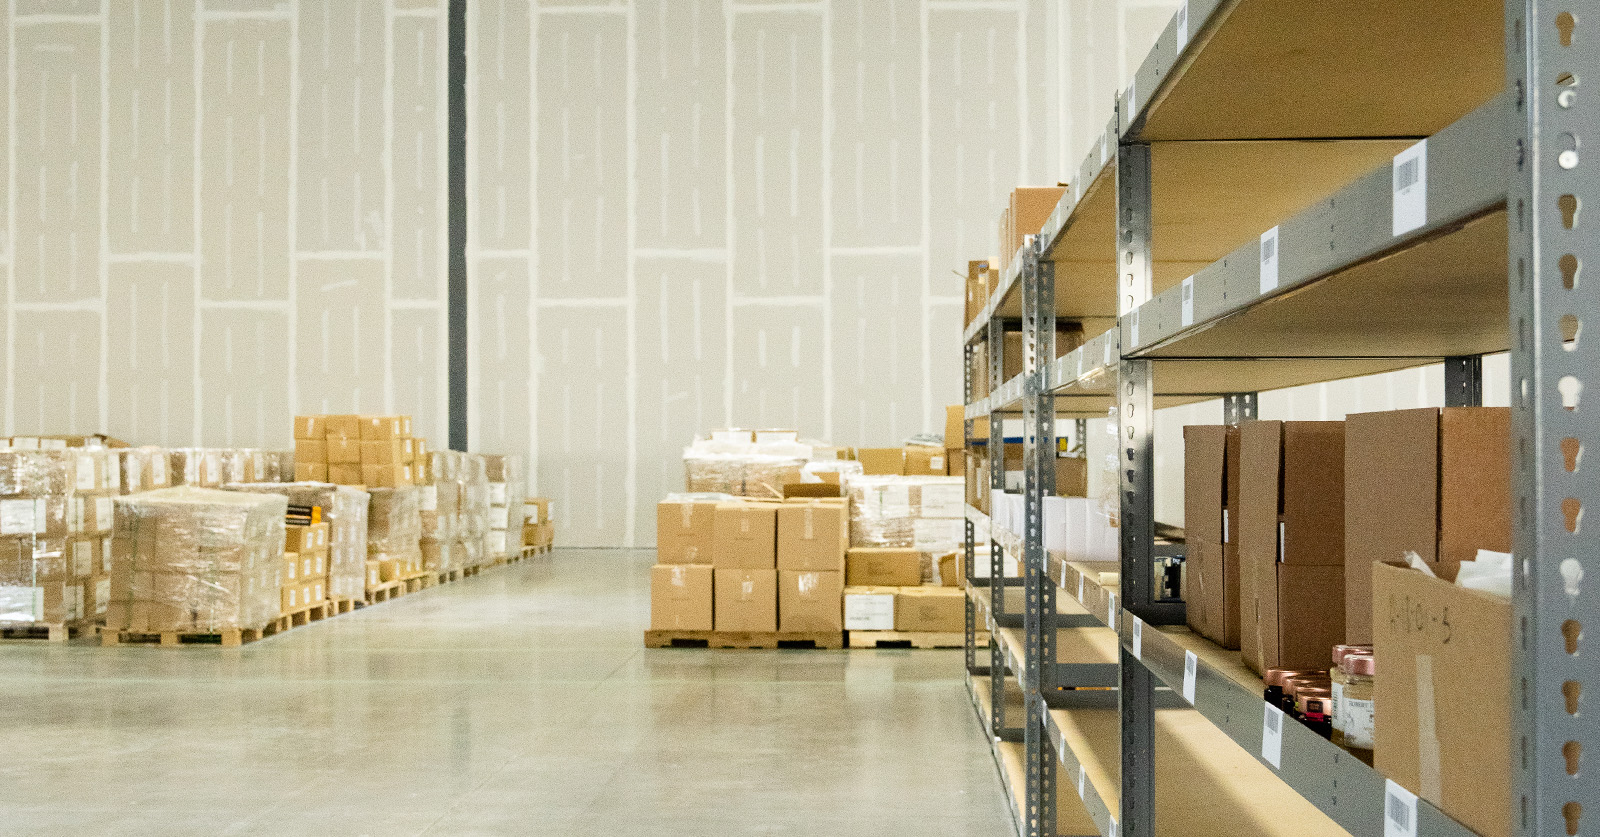 Adaptive spaces, mean your products are guaranteed to have the storage capabilities they need. Make sure that your Amazon partner's warehousing and logistics spaces are right for your product, even in busy seasons.